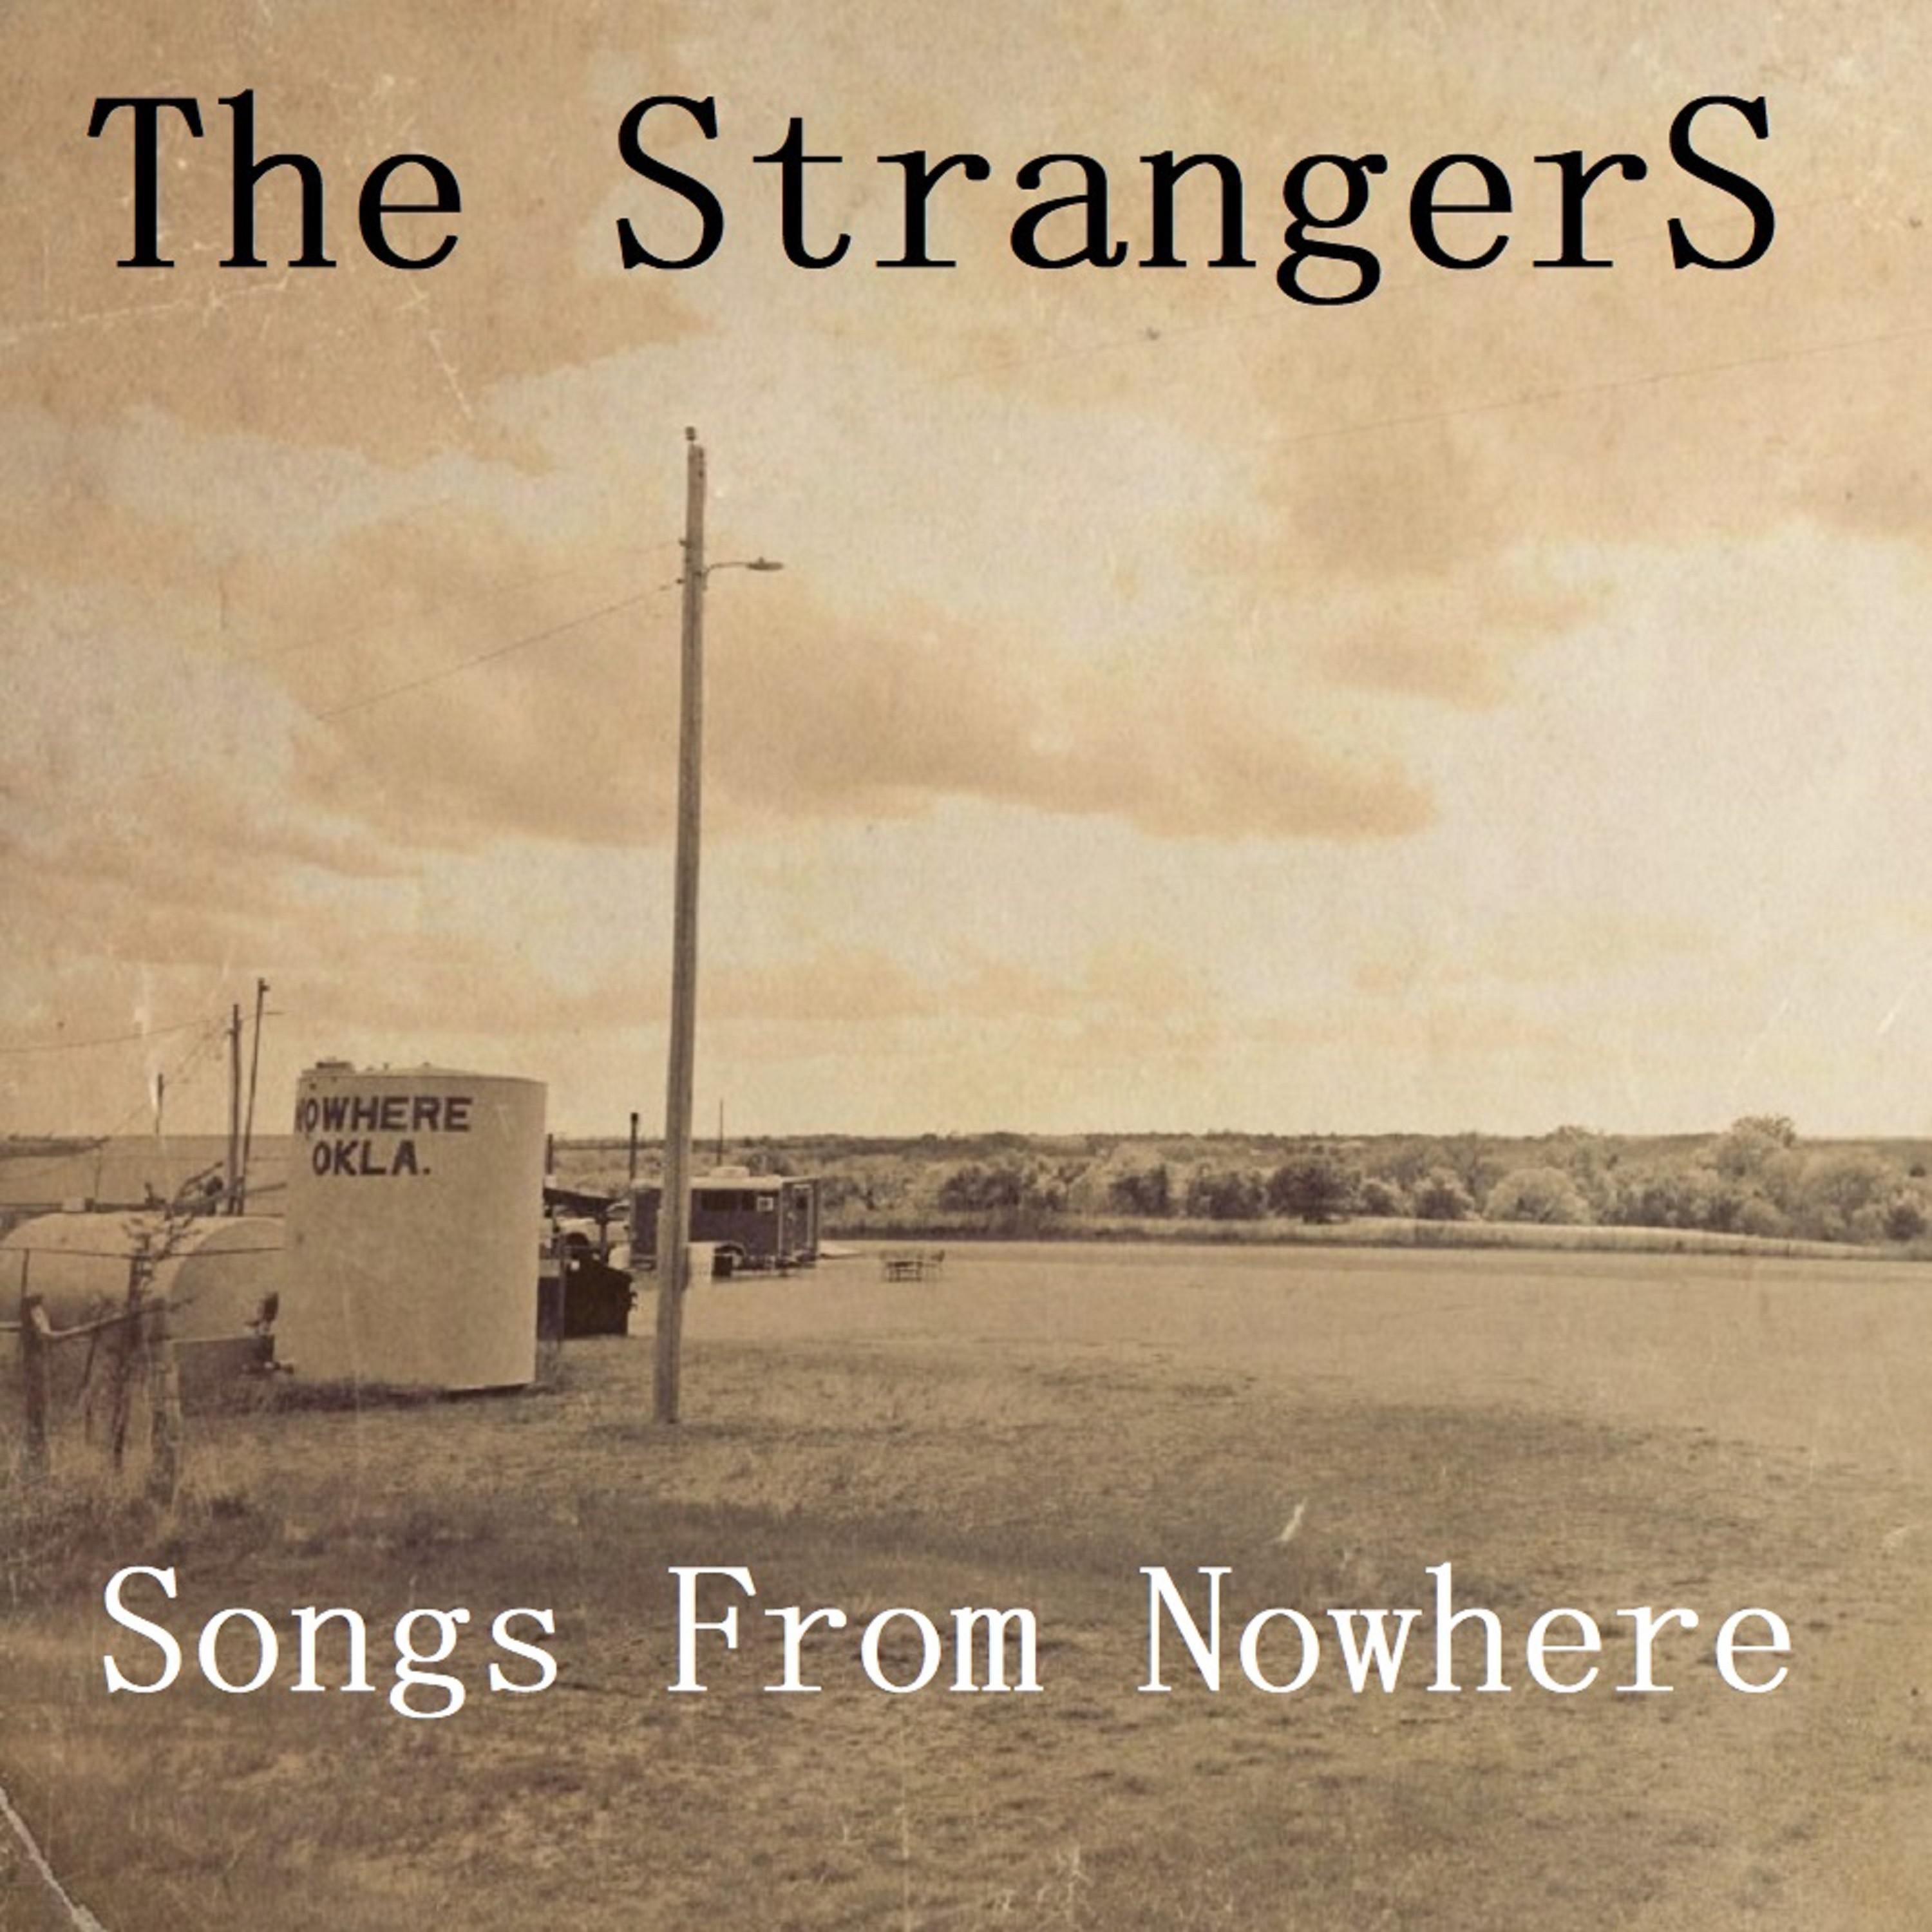 The Strangers - Lost on the Way